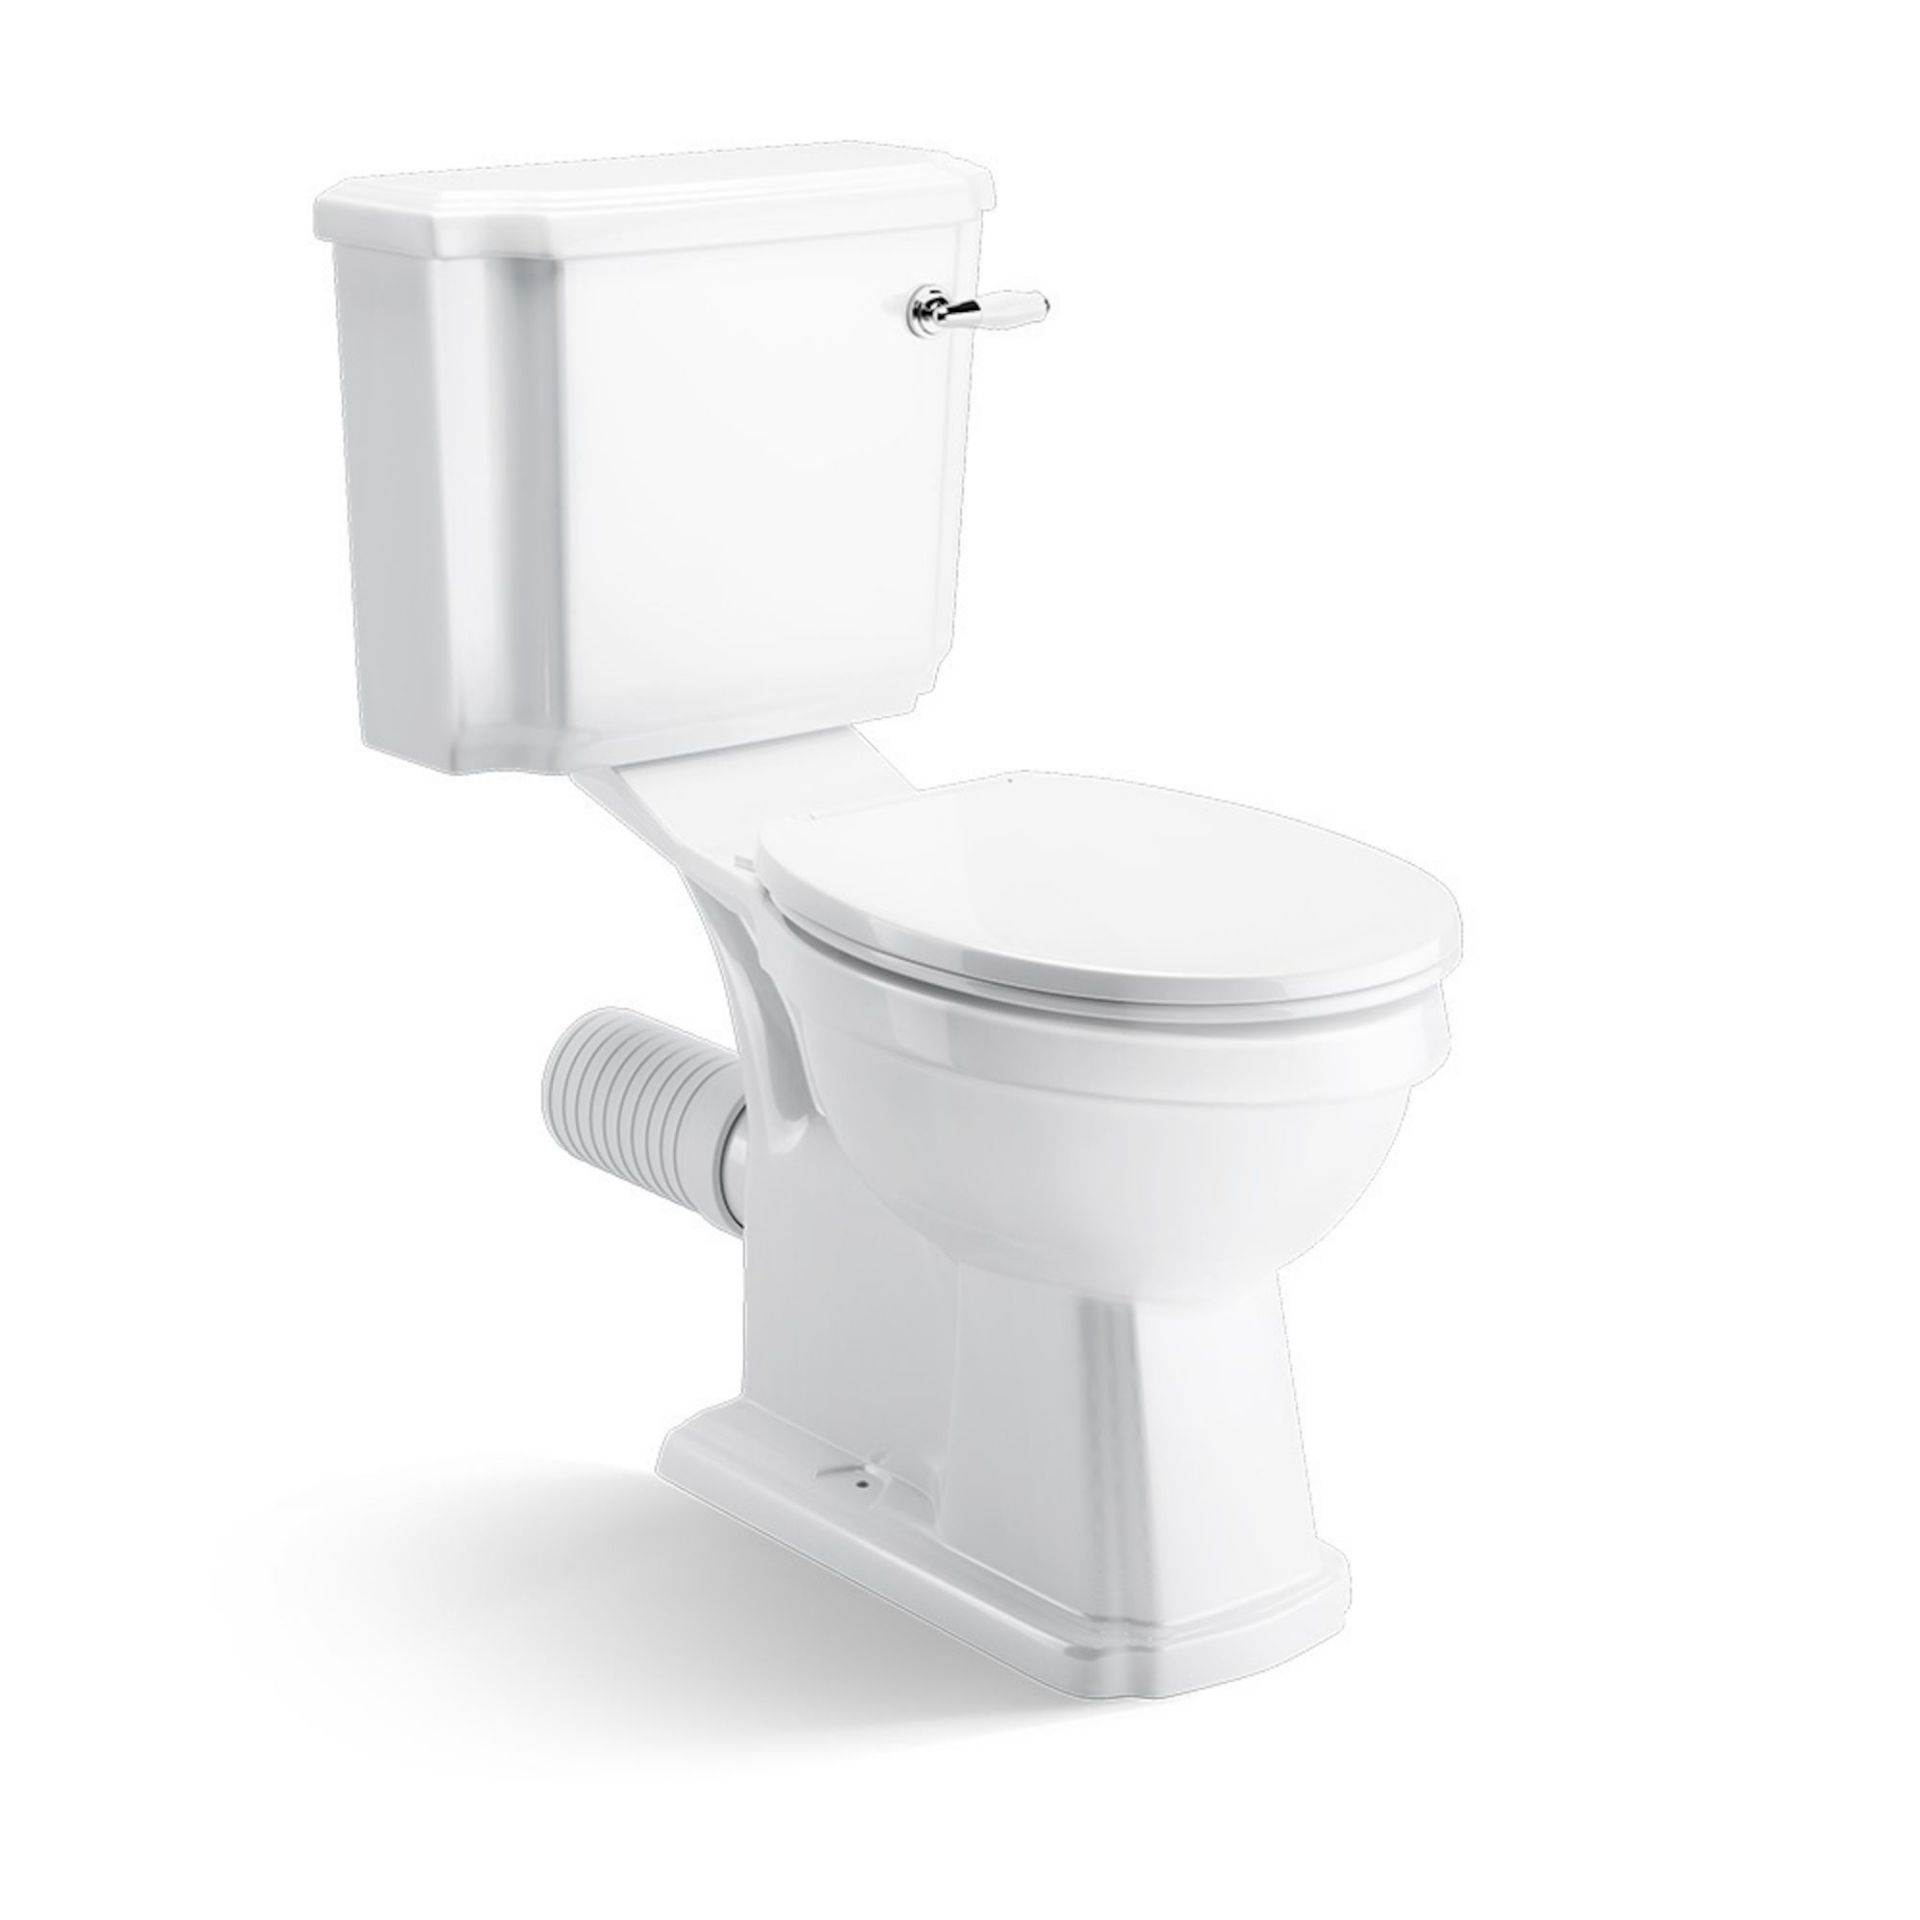 New & Boxed Cambridge Traditional Close Coupled Toilet & Cistern - White Seat. Ccg62... - Image 2 of 2